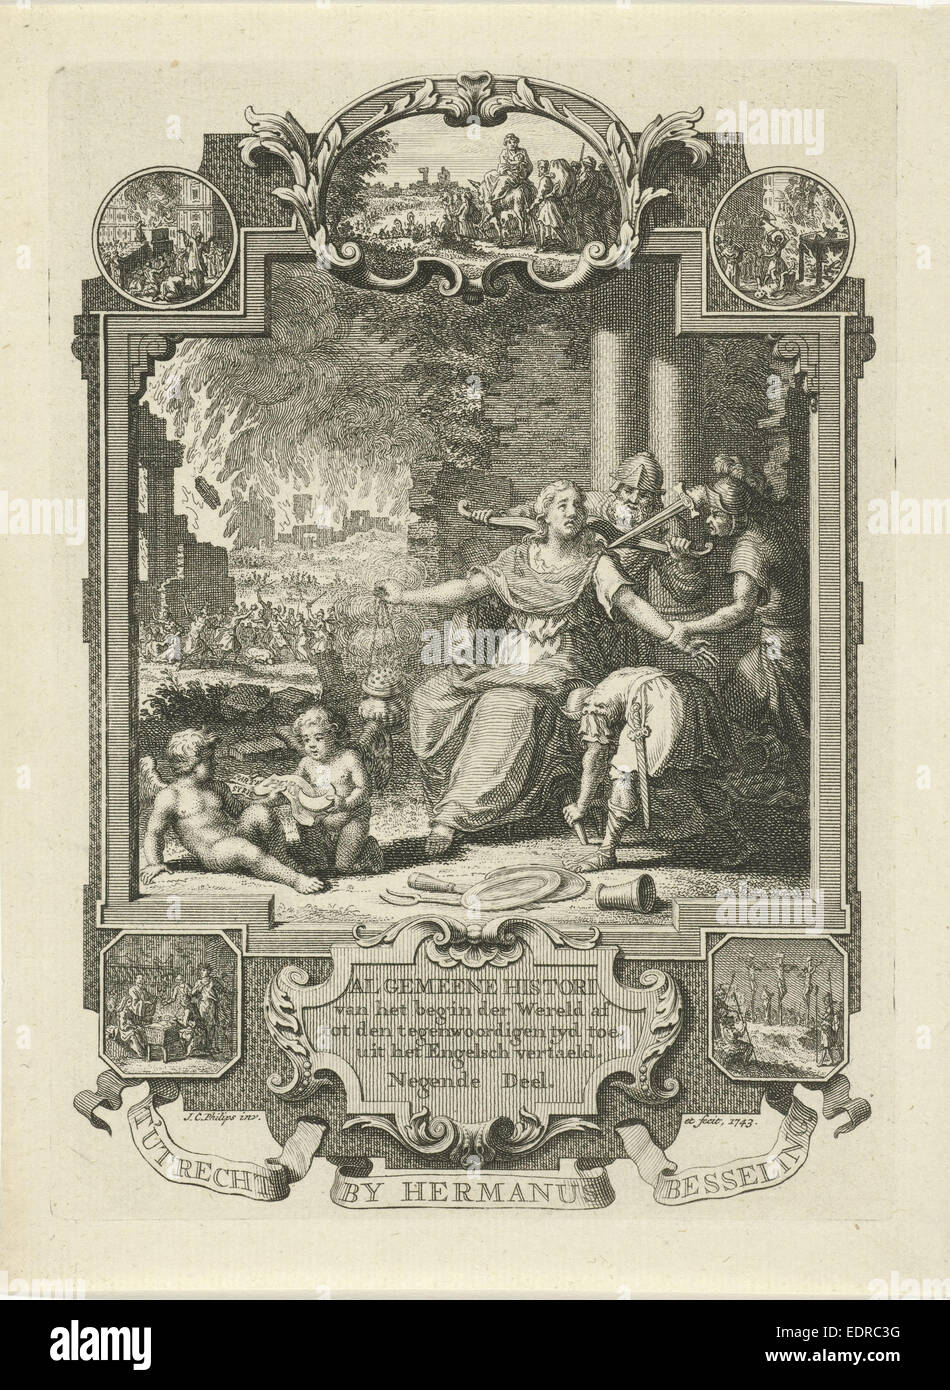 Cartouche with allegory of Jewish history, Jan Caspar Philips, 1743 Stock Photo